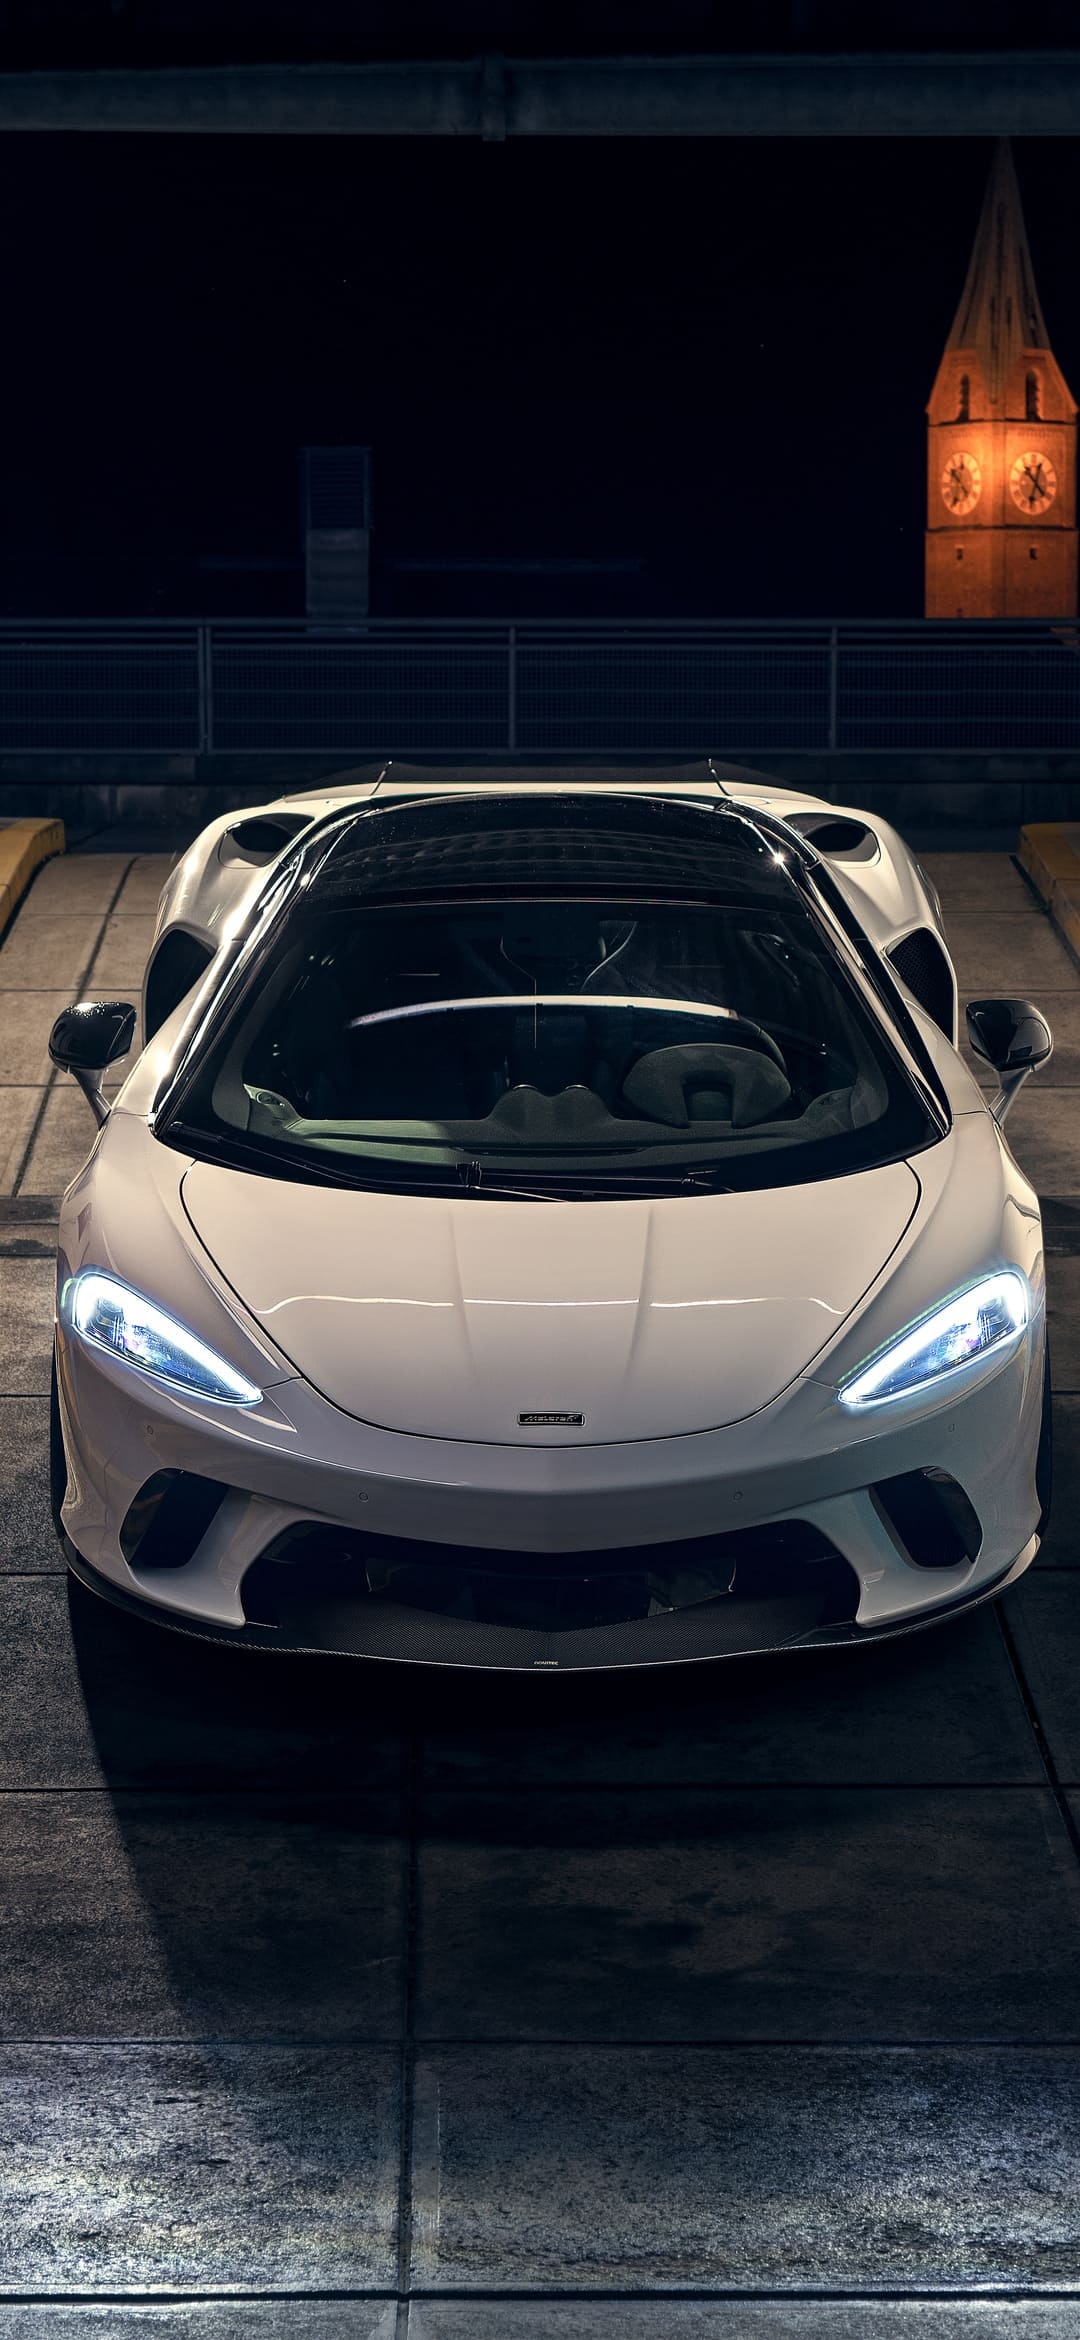 Sports Car: Adapts to different road conditions and driving styles. 1080x2340 HD Wallpaper.